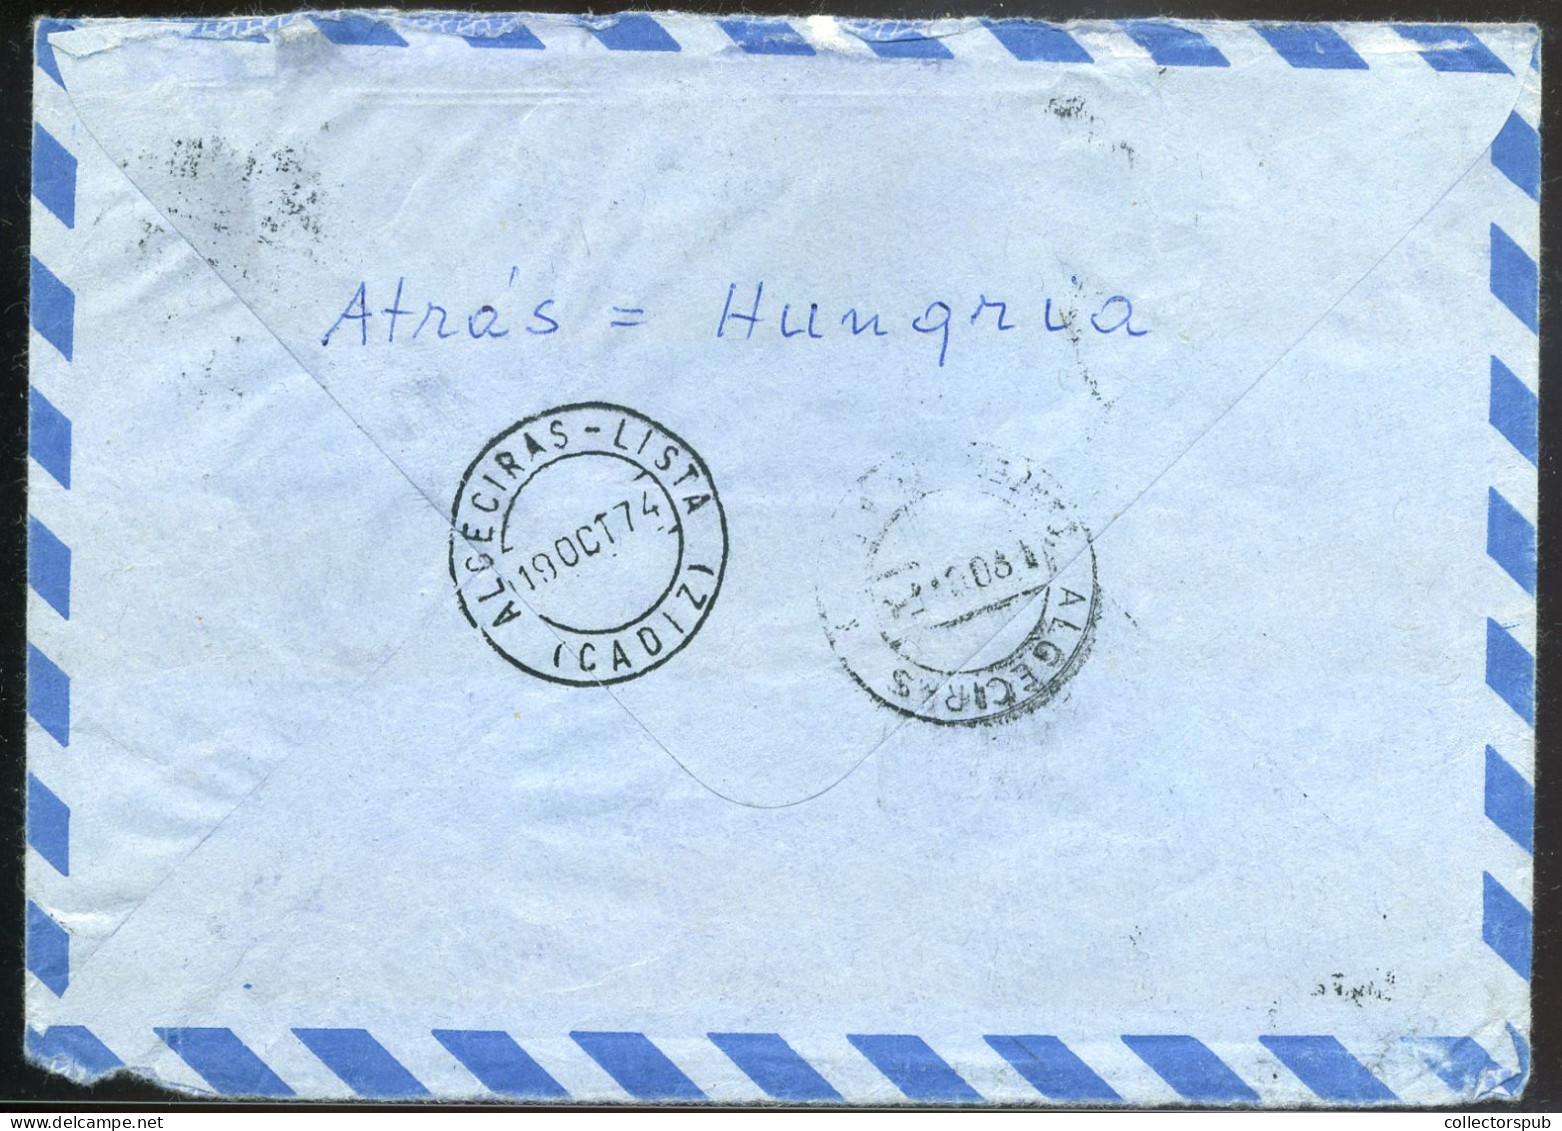 HUNGARY > SPAIN Interesting Retour Airmail Cover 1974 - Covers & Documents